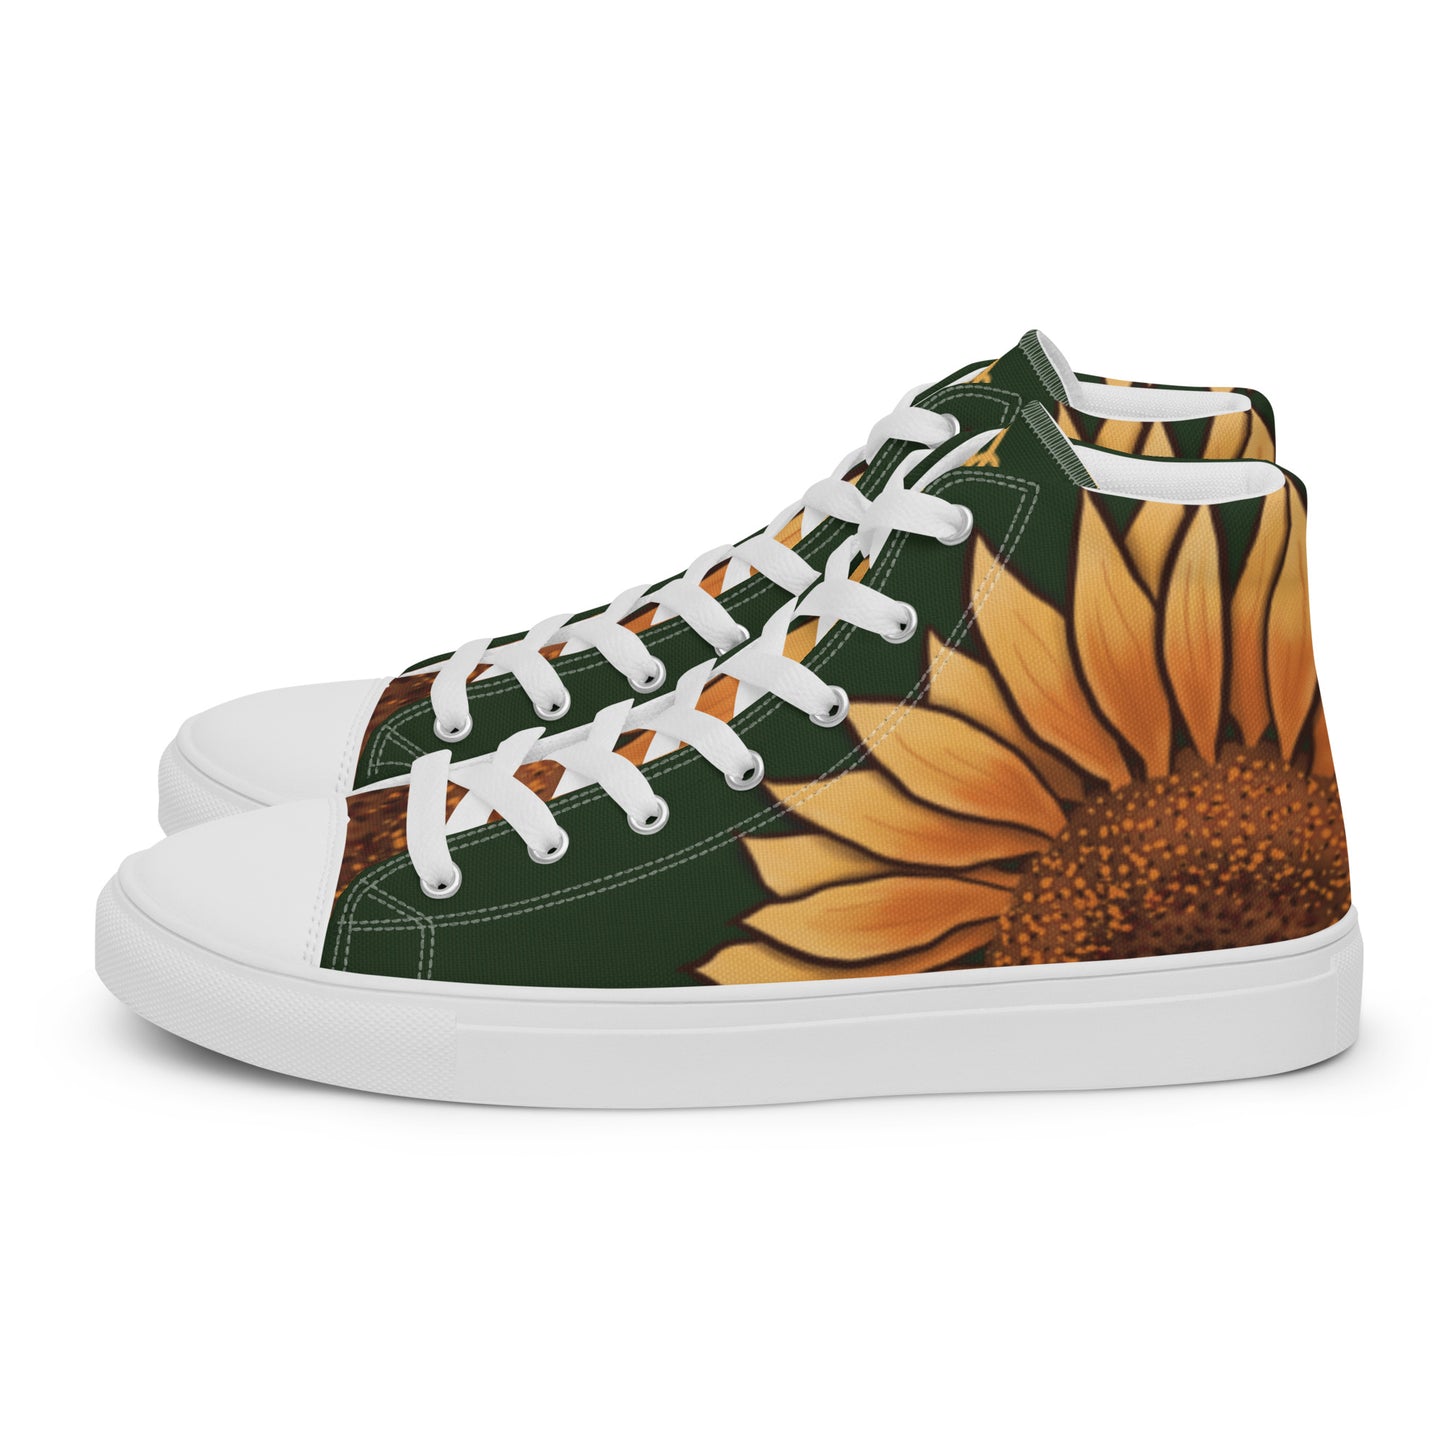 Left view: a pair of high top shoes with a large sunflower on the heel and a forest green background.